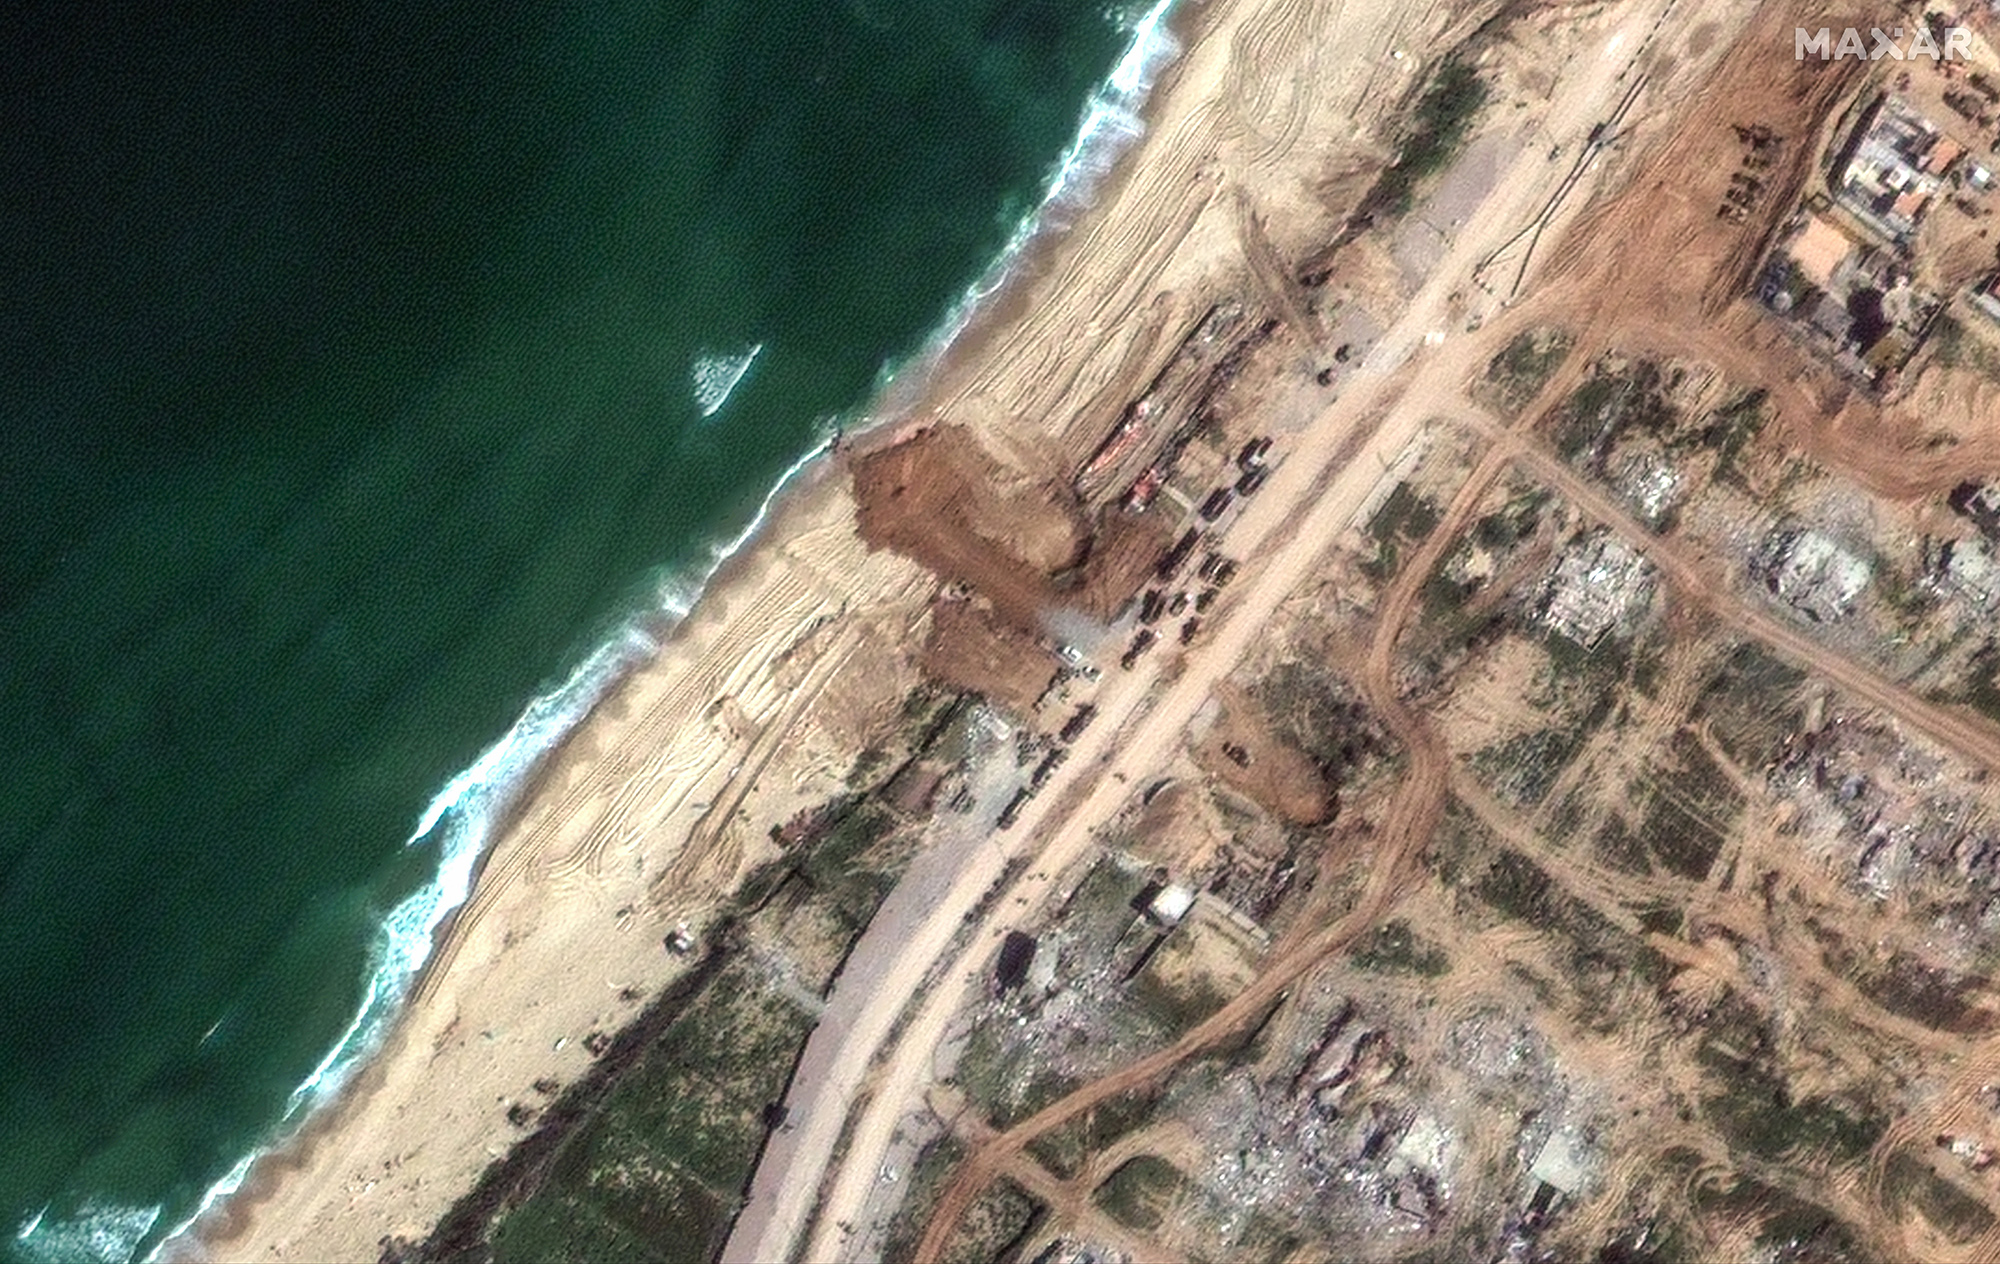 Satellite images taken on March 11 show site of jetty where aid ship set to dock in Gaza.